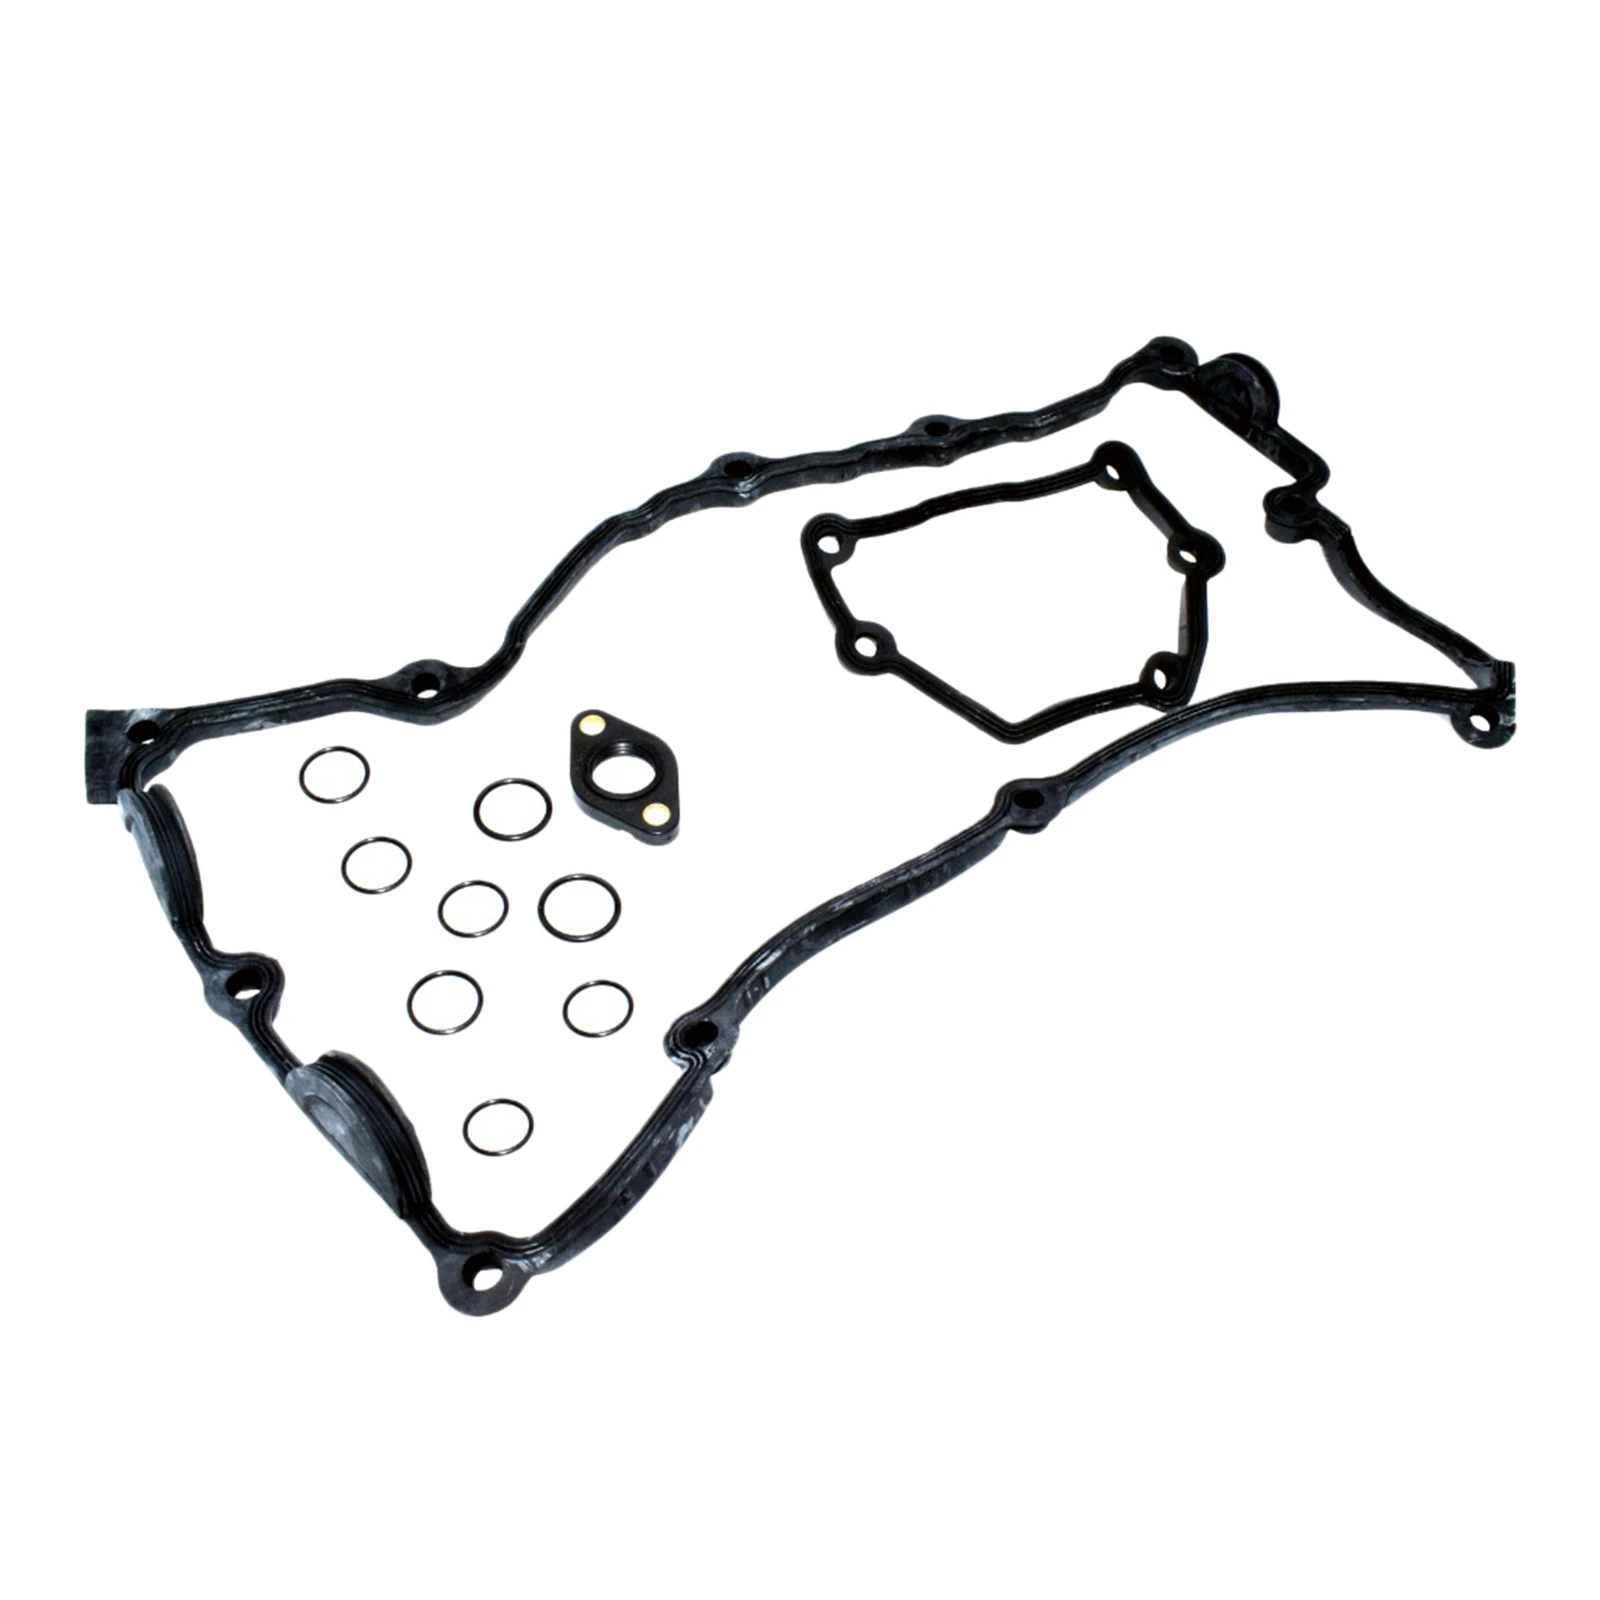 Engine Valve Cover Gasket Replaces 11120032224 for BMW 1,8L 2,0L N42 N46 Accessories